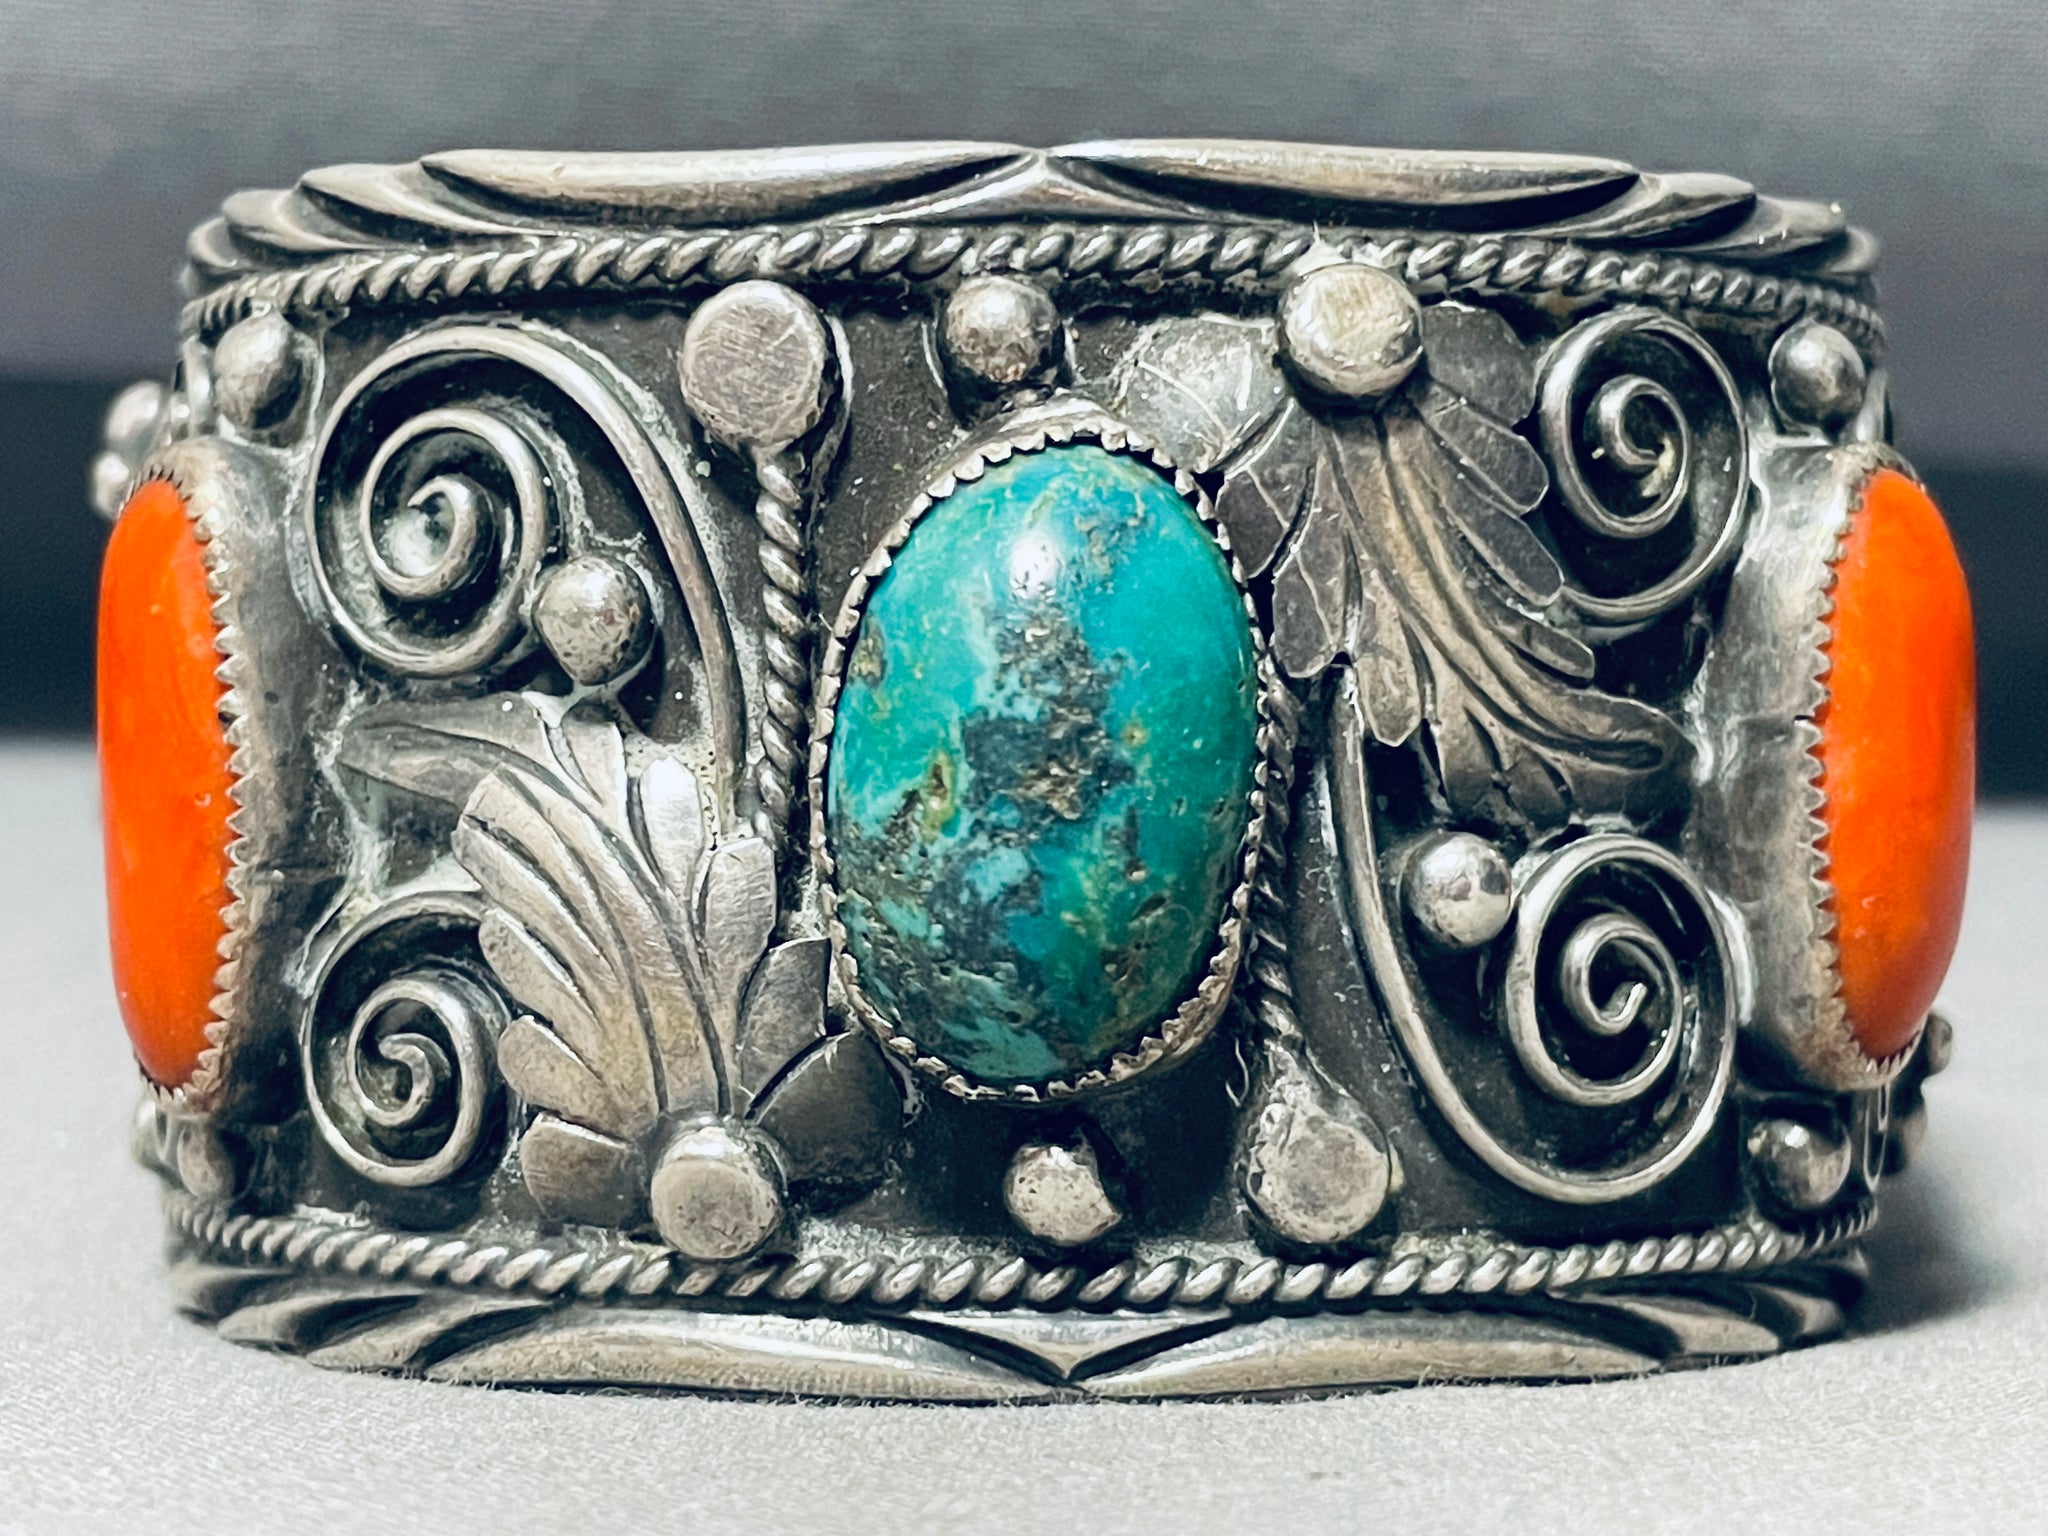 roach clip brass silver & turquoise ring – Molly Rose Jewelry